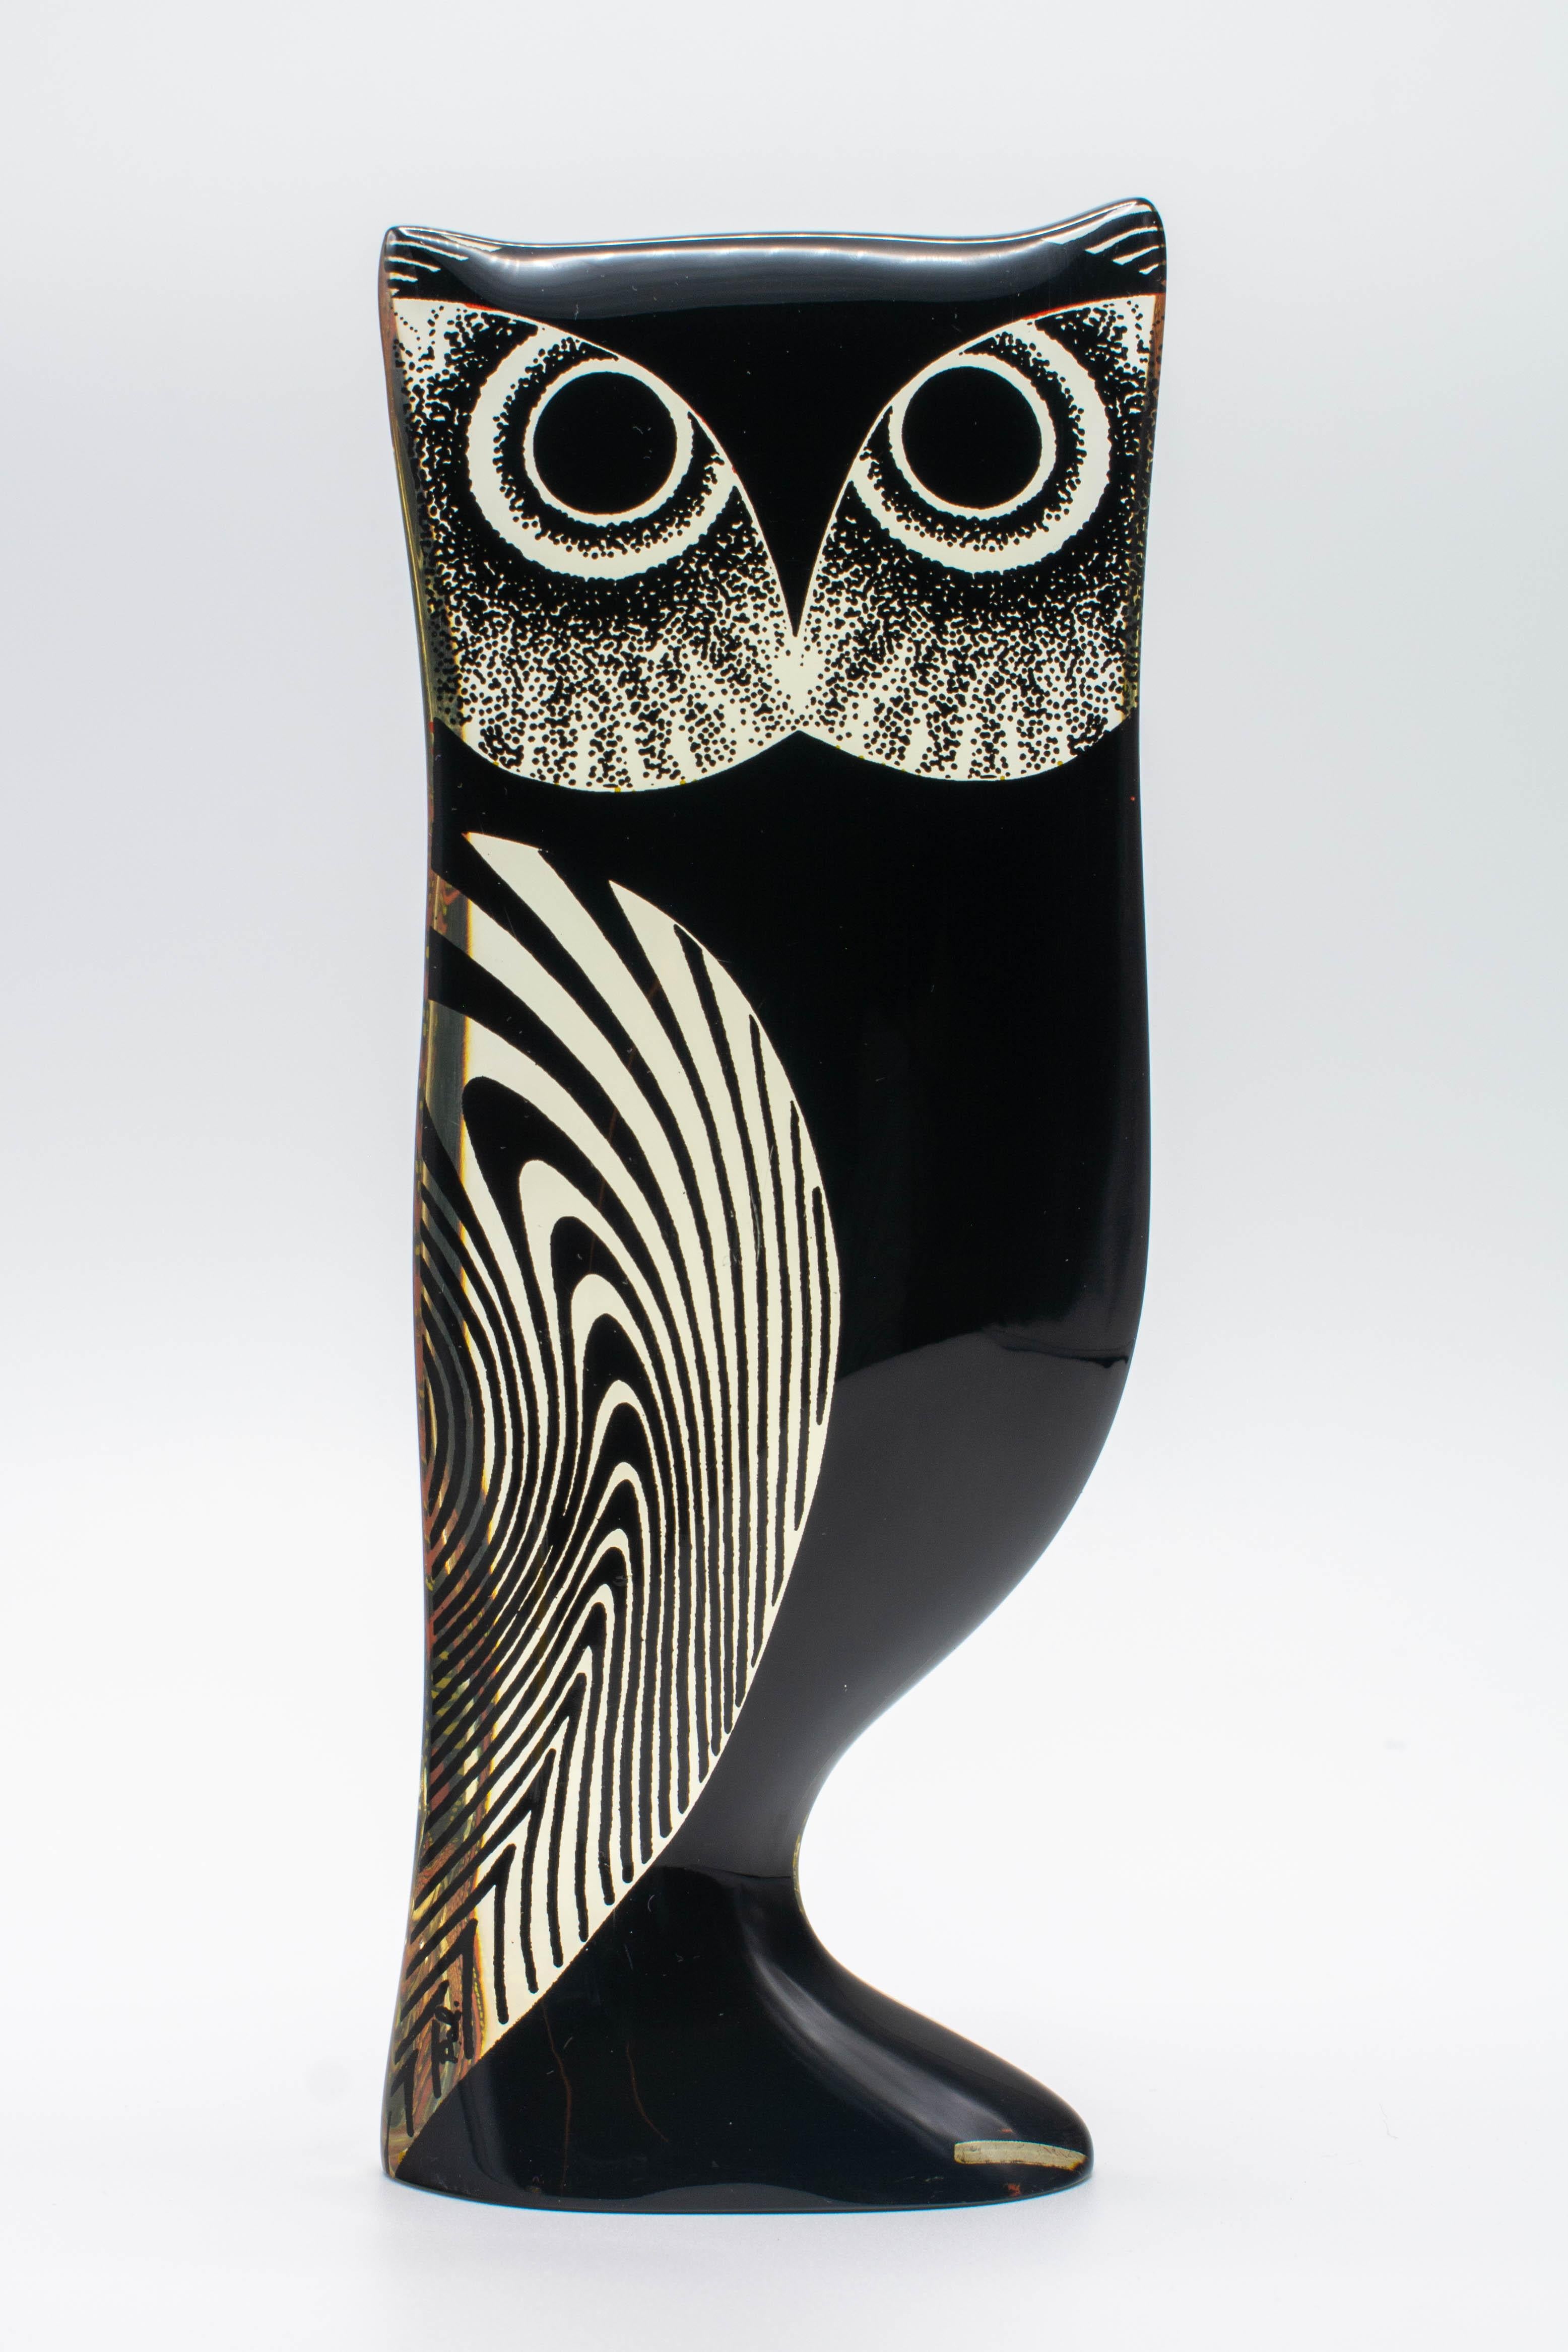 A Mid-Century Modern Lucite Op Art orange, yellow and black owl designed by Abraham Palatnik. Original label on bottom: Made in Brazil. Abraham Palatnik (1928-2020) was a Brazilian artist and inventor whose innovations include kinechromatic art.